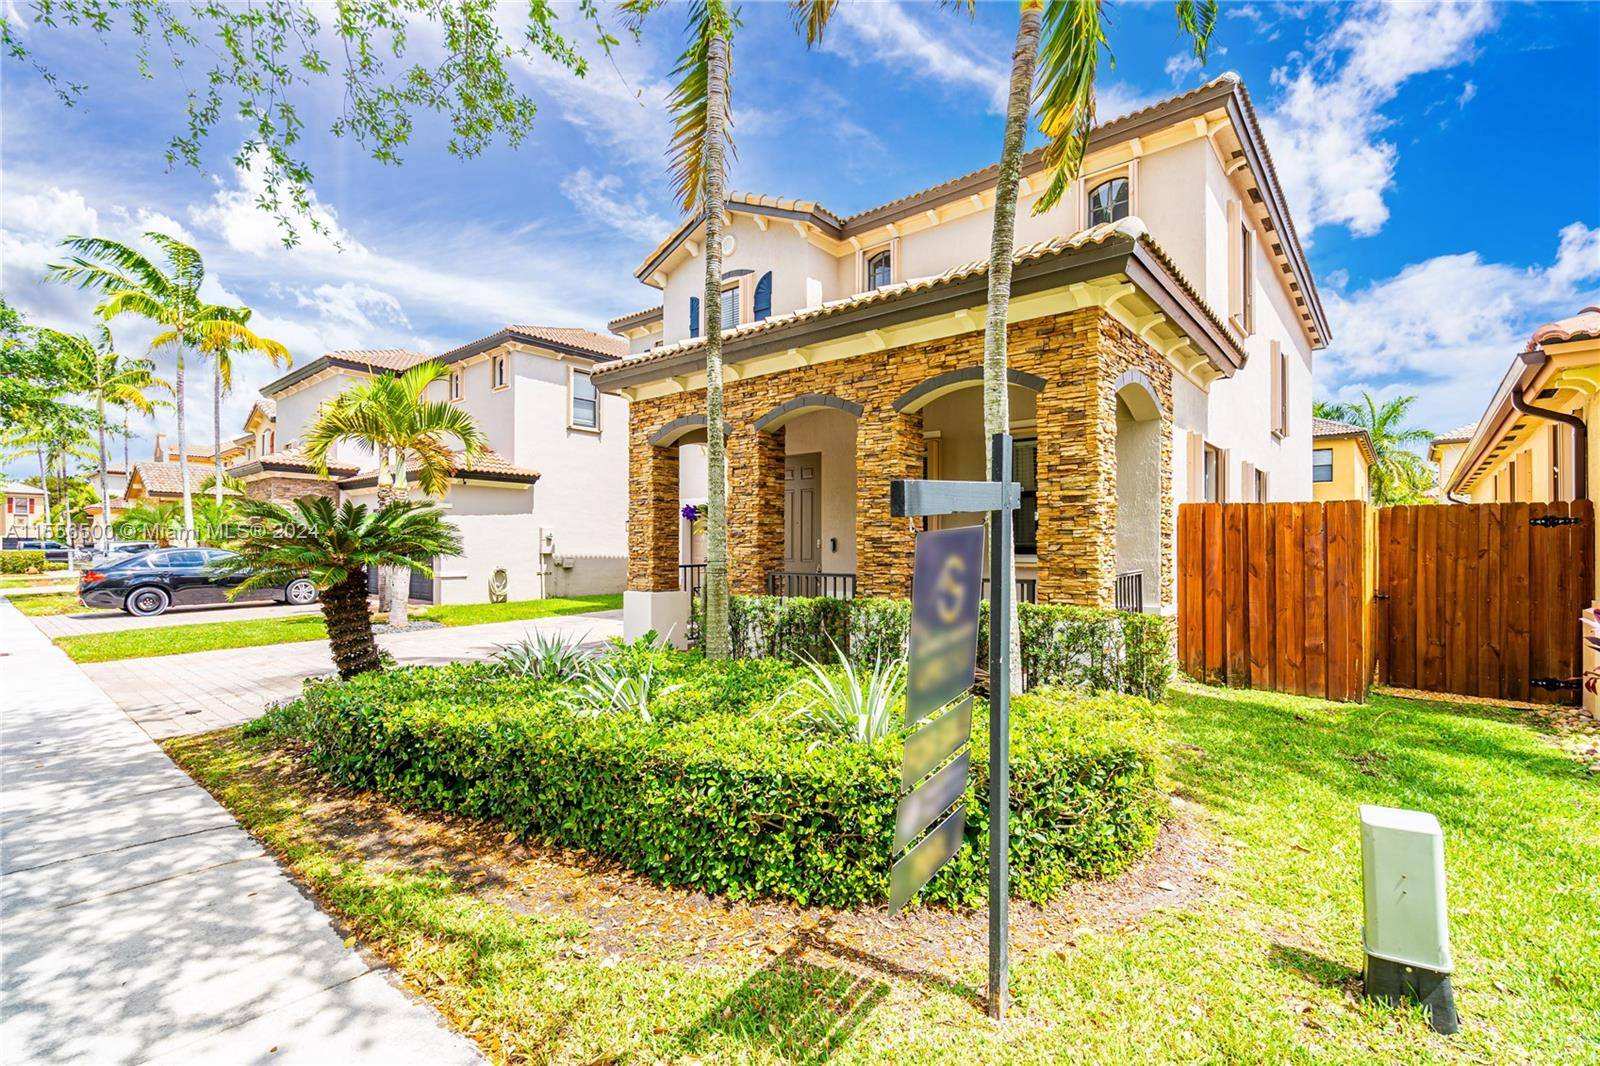 This 4 bed, 2. 5 bath home in Silver Palm, Homestead, offers comfort and style.